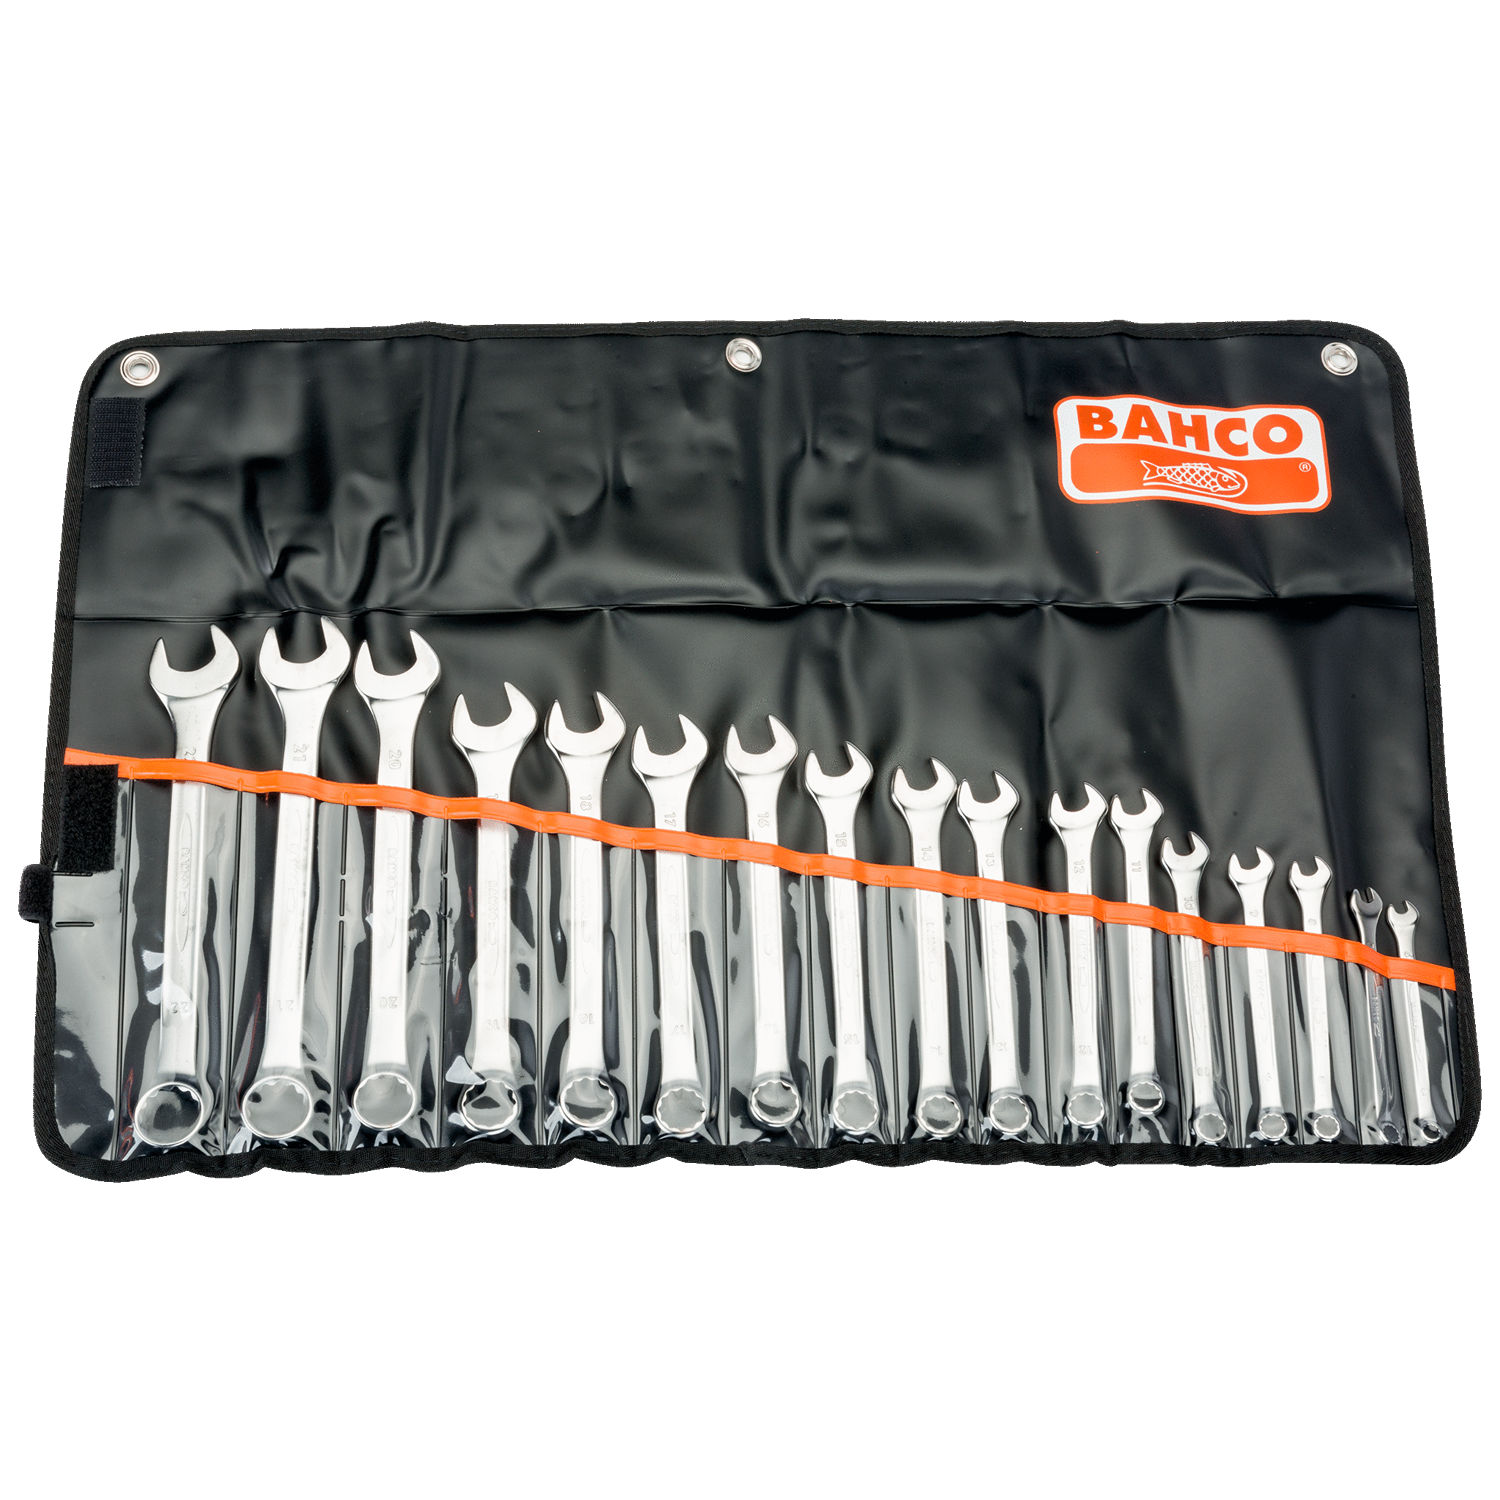 BAHCO 111M/17T Metric Flat Combination Wrench Set 6-22 mm-17 Pcs - Premium Flat Combination Wrench Set from BAHCO - Shop now at Yew Aik.